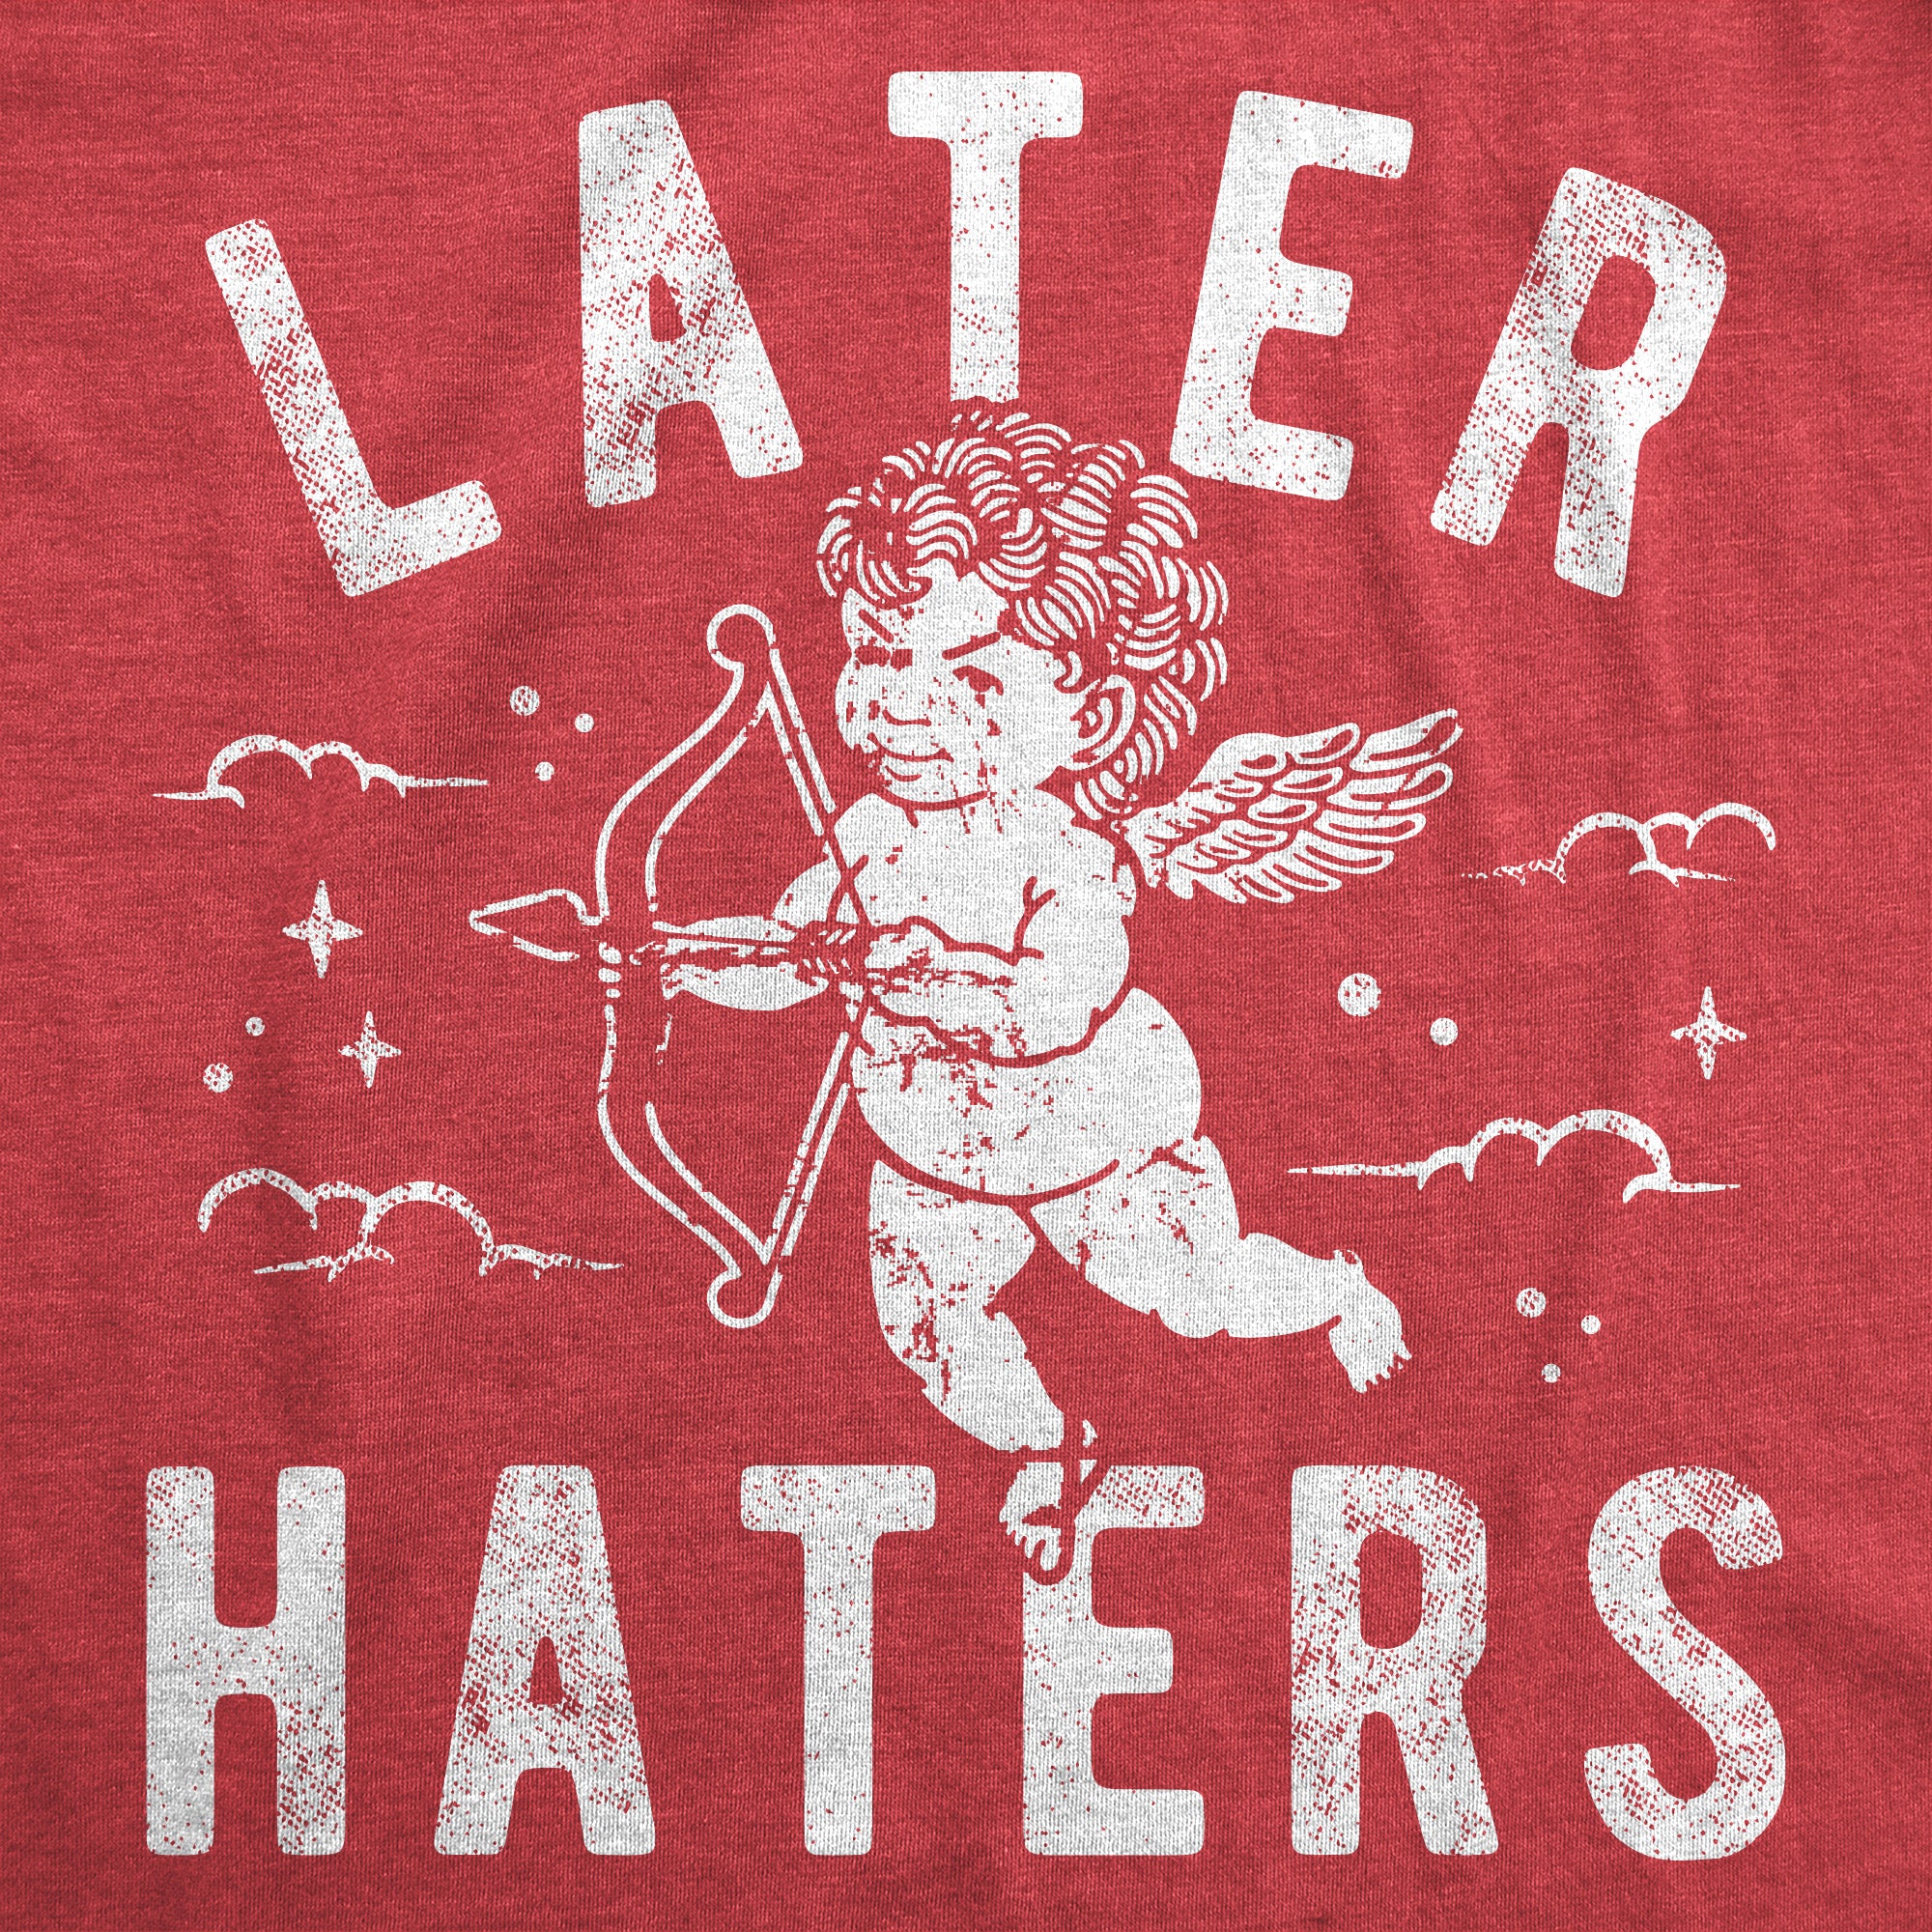 Funny Heather Red - Later Haters Later Haters Mens T Shirt Nerdy Valentine's Day Sarcastic Tee